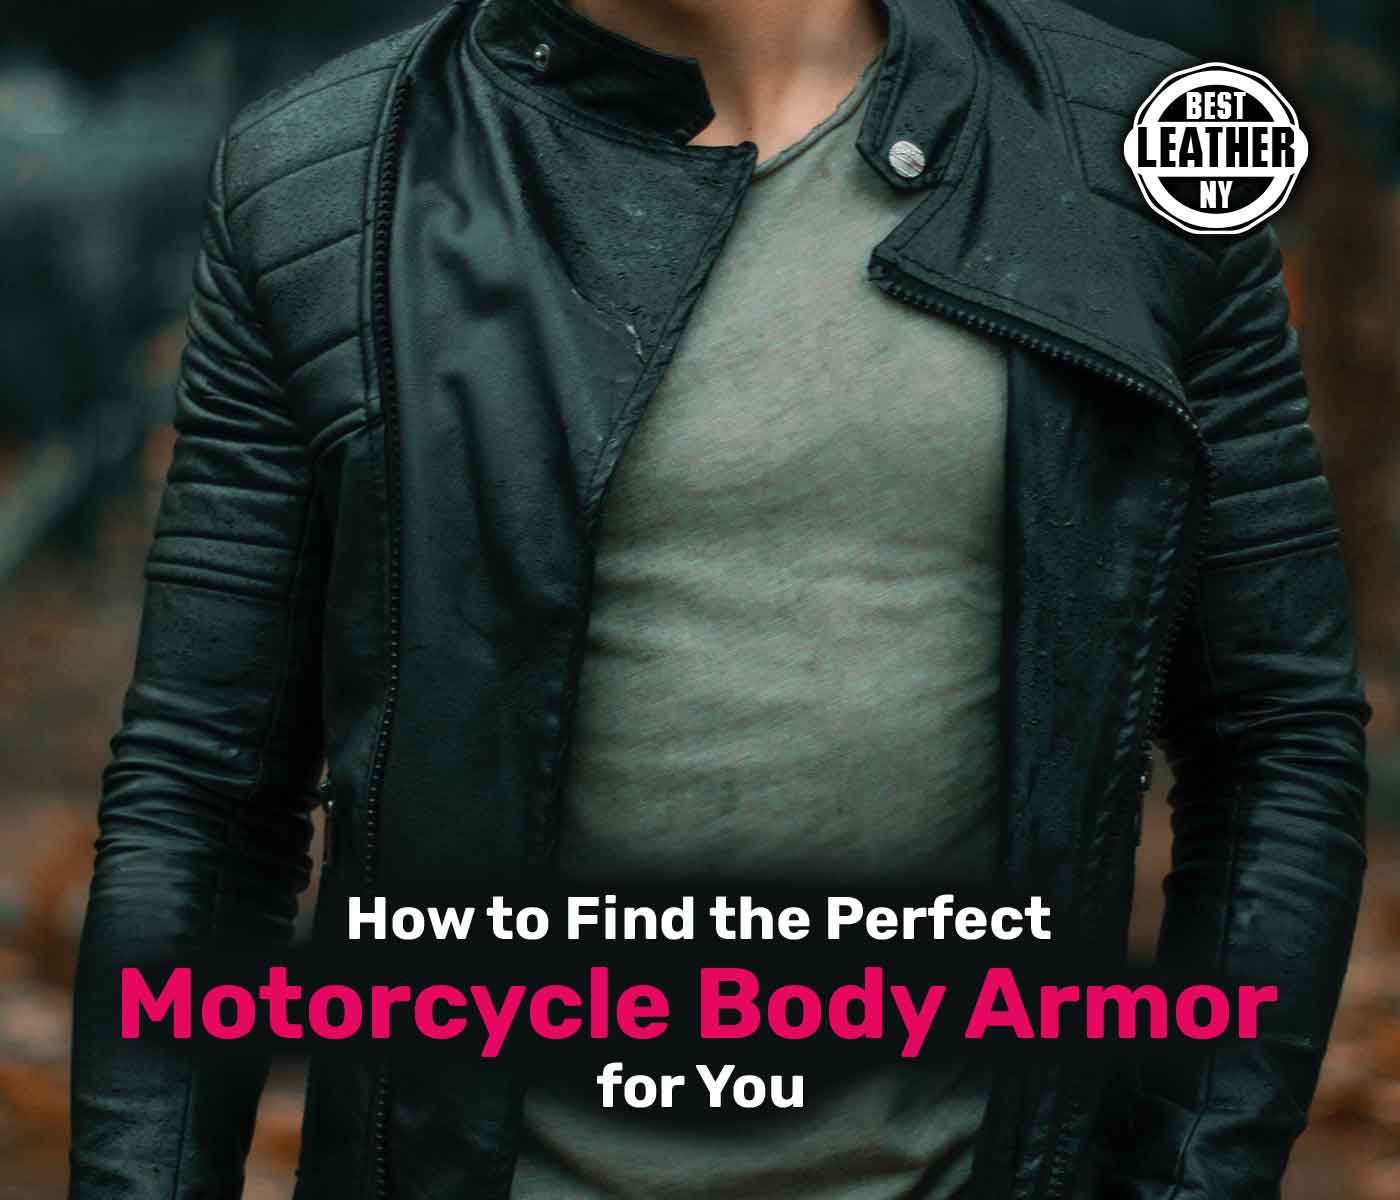 How to Find the Perfect Motorcycle Body Armor for You?